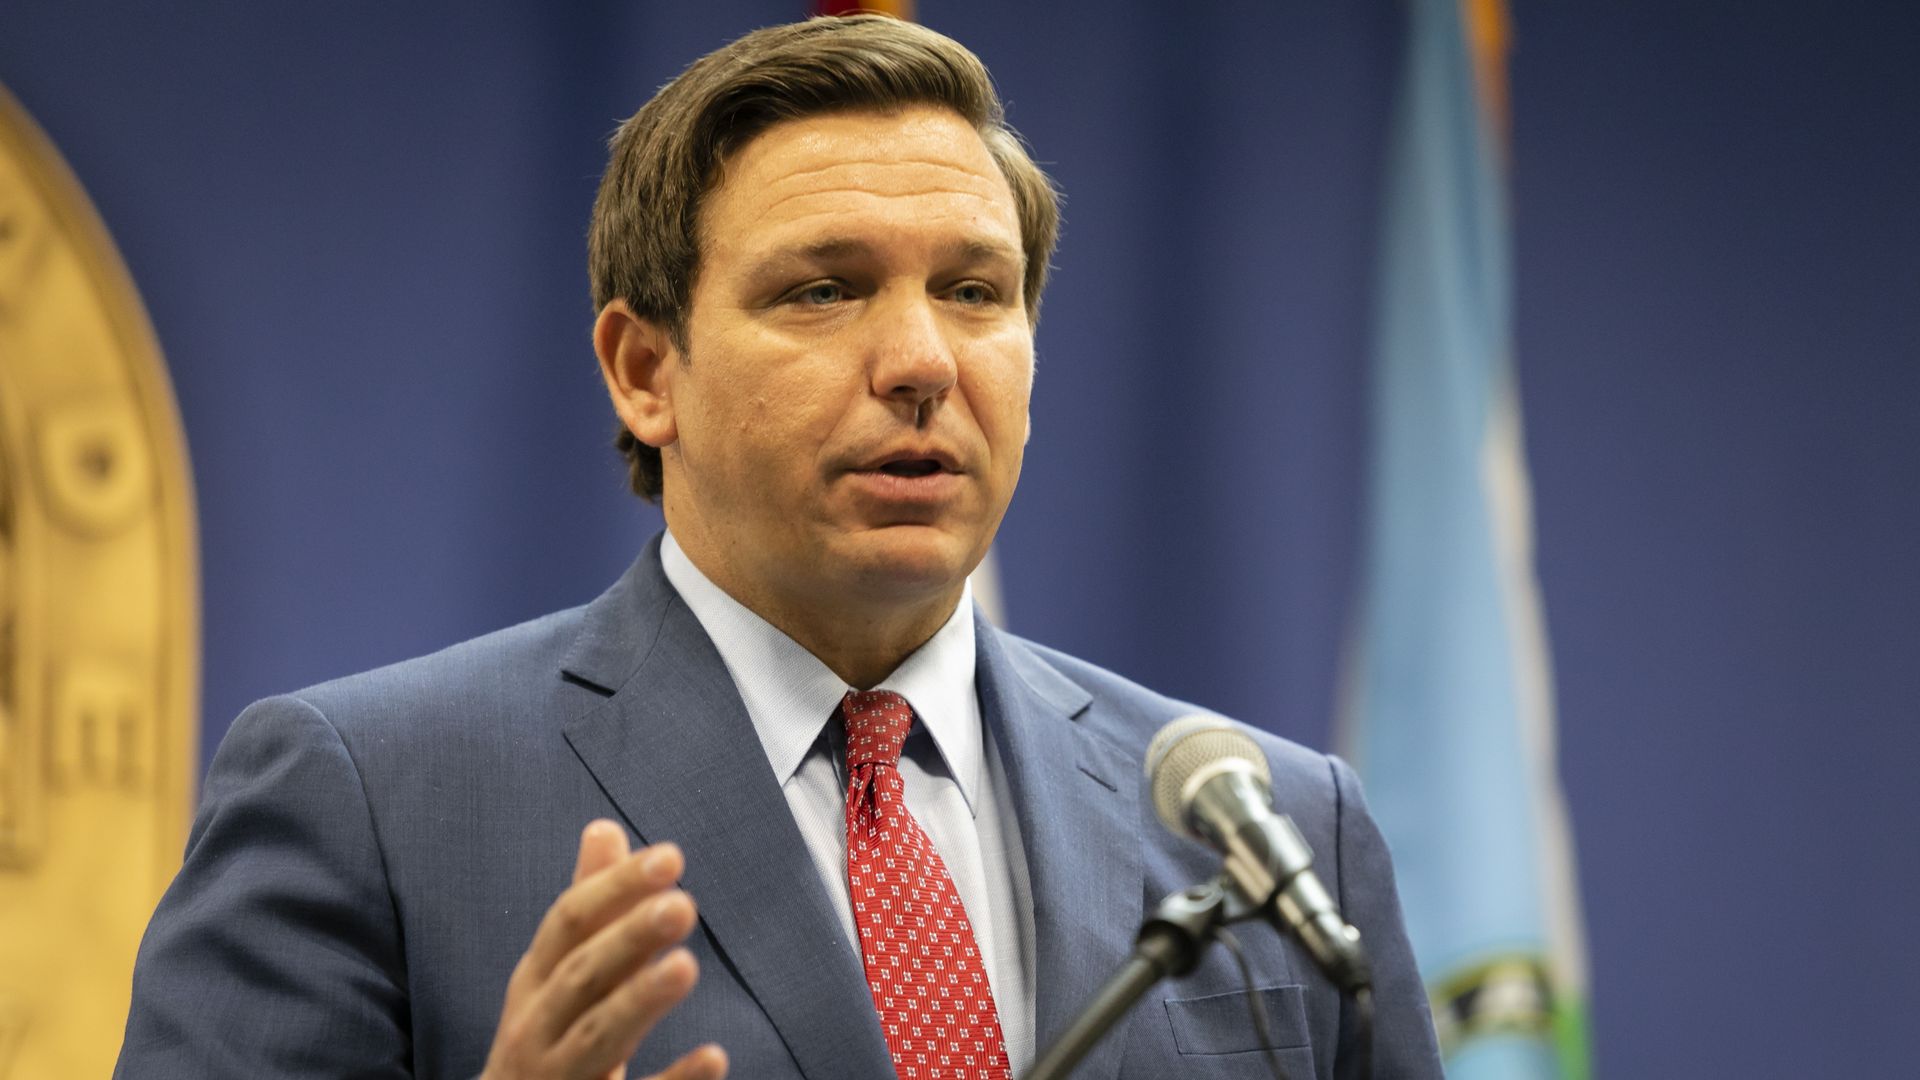 Ron DeSantis stands in a suit and tie 